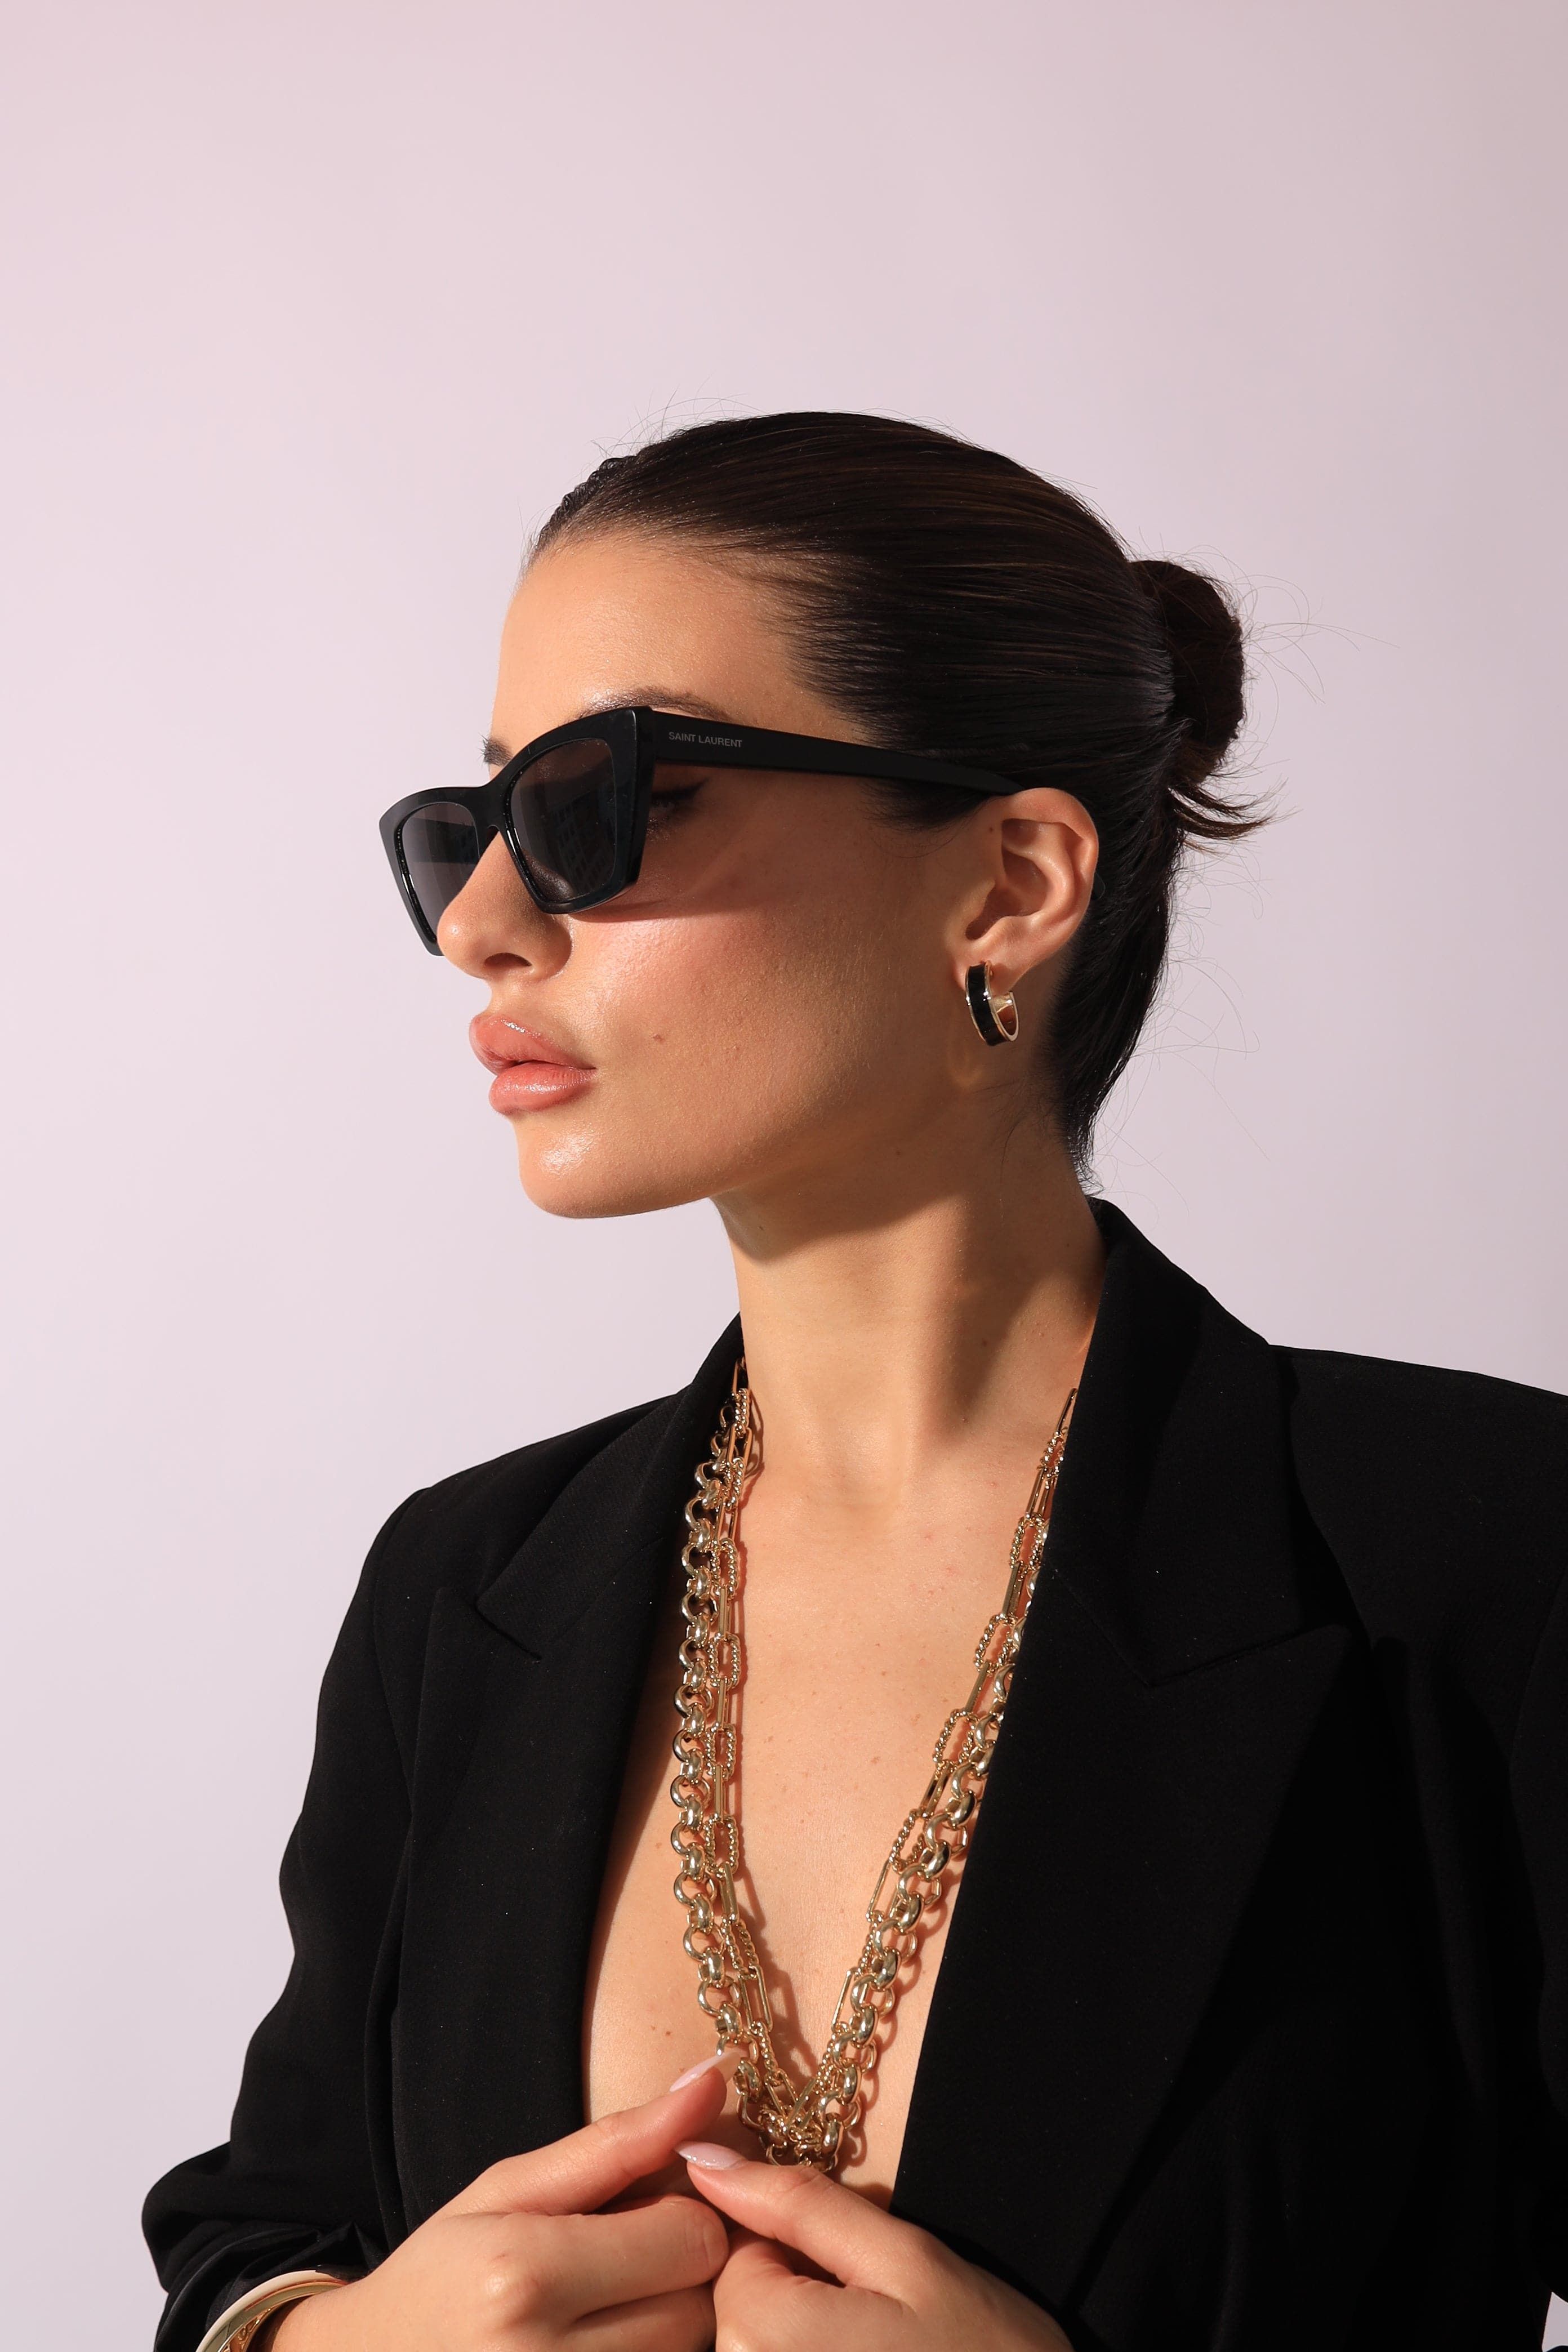 a woman wearing sunglasses and a necklace